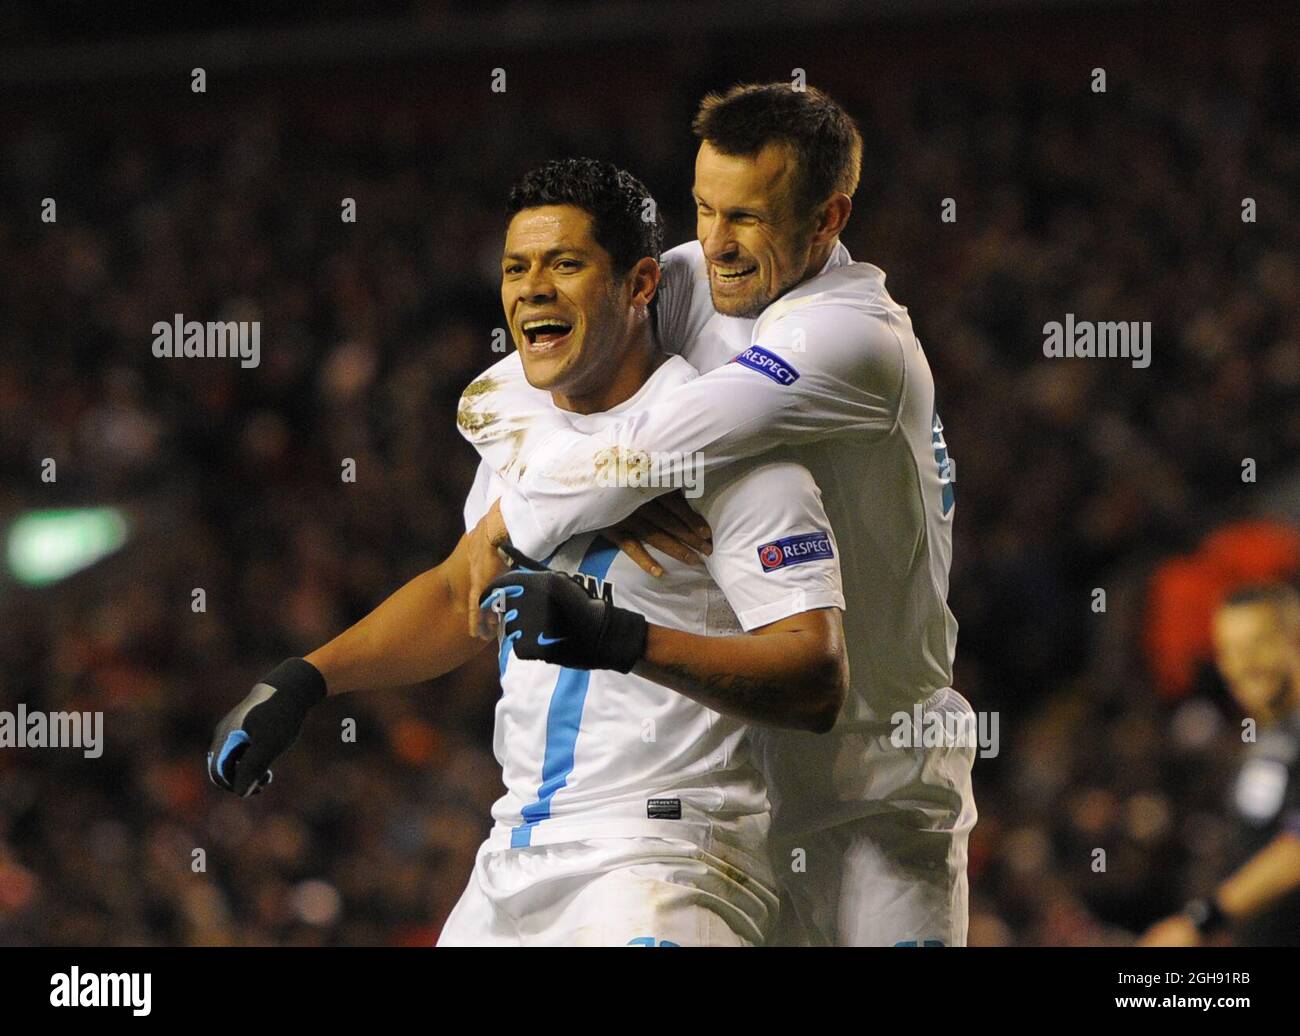 Hulk of Zenit St Petersburg (L) celebrates his goal during the UEFA Europa League Round of 32, Second Leg match between Liverpool and Zenit St Petersburg at the Anfield Stadium in Liverpool, United Kingdom on February 21, 2013. Stock Photo